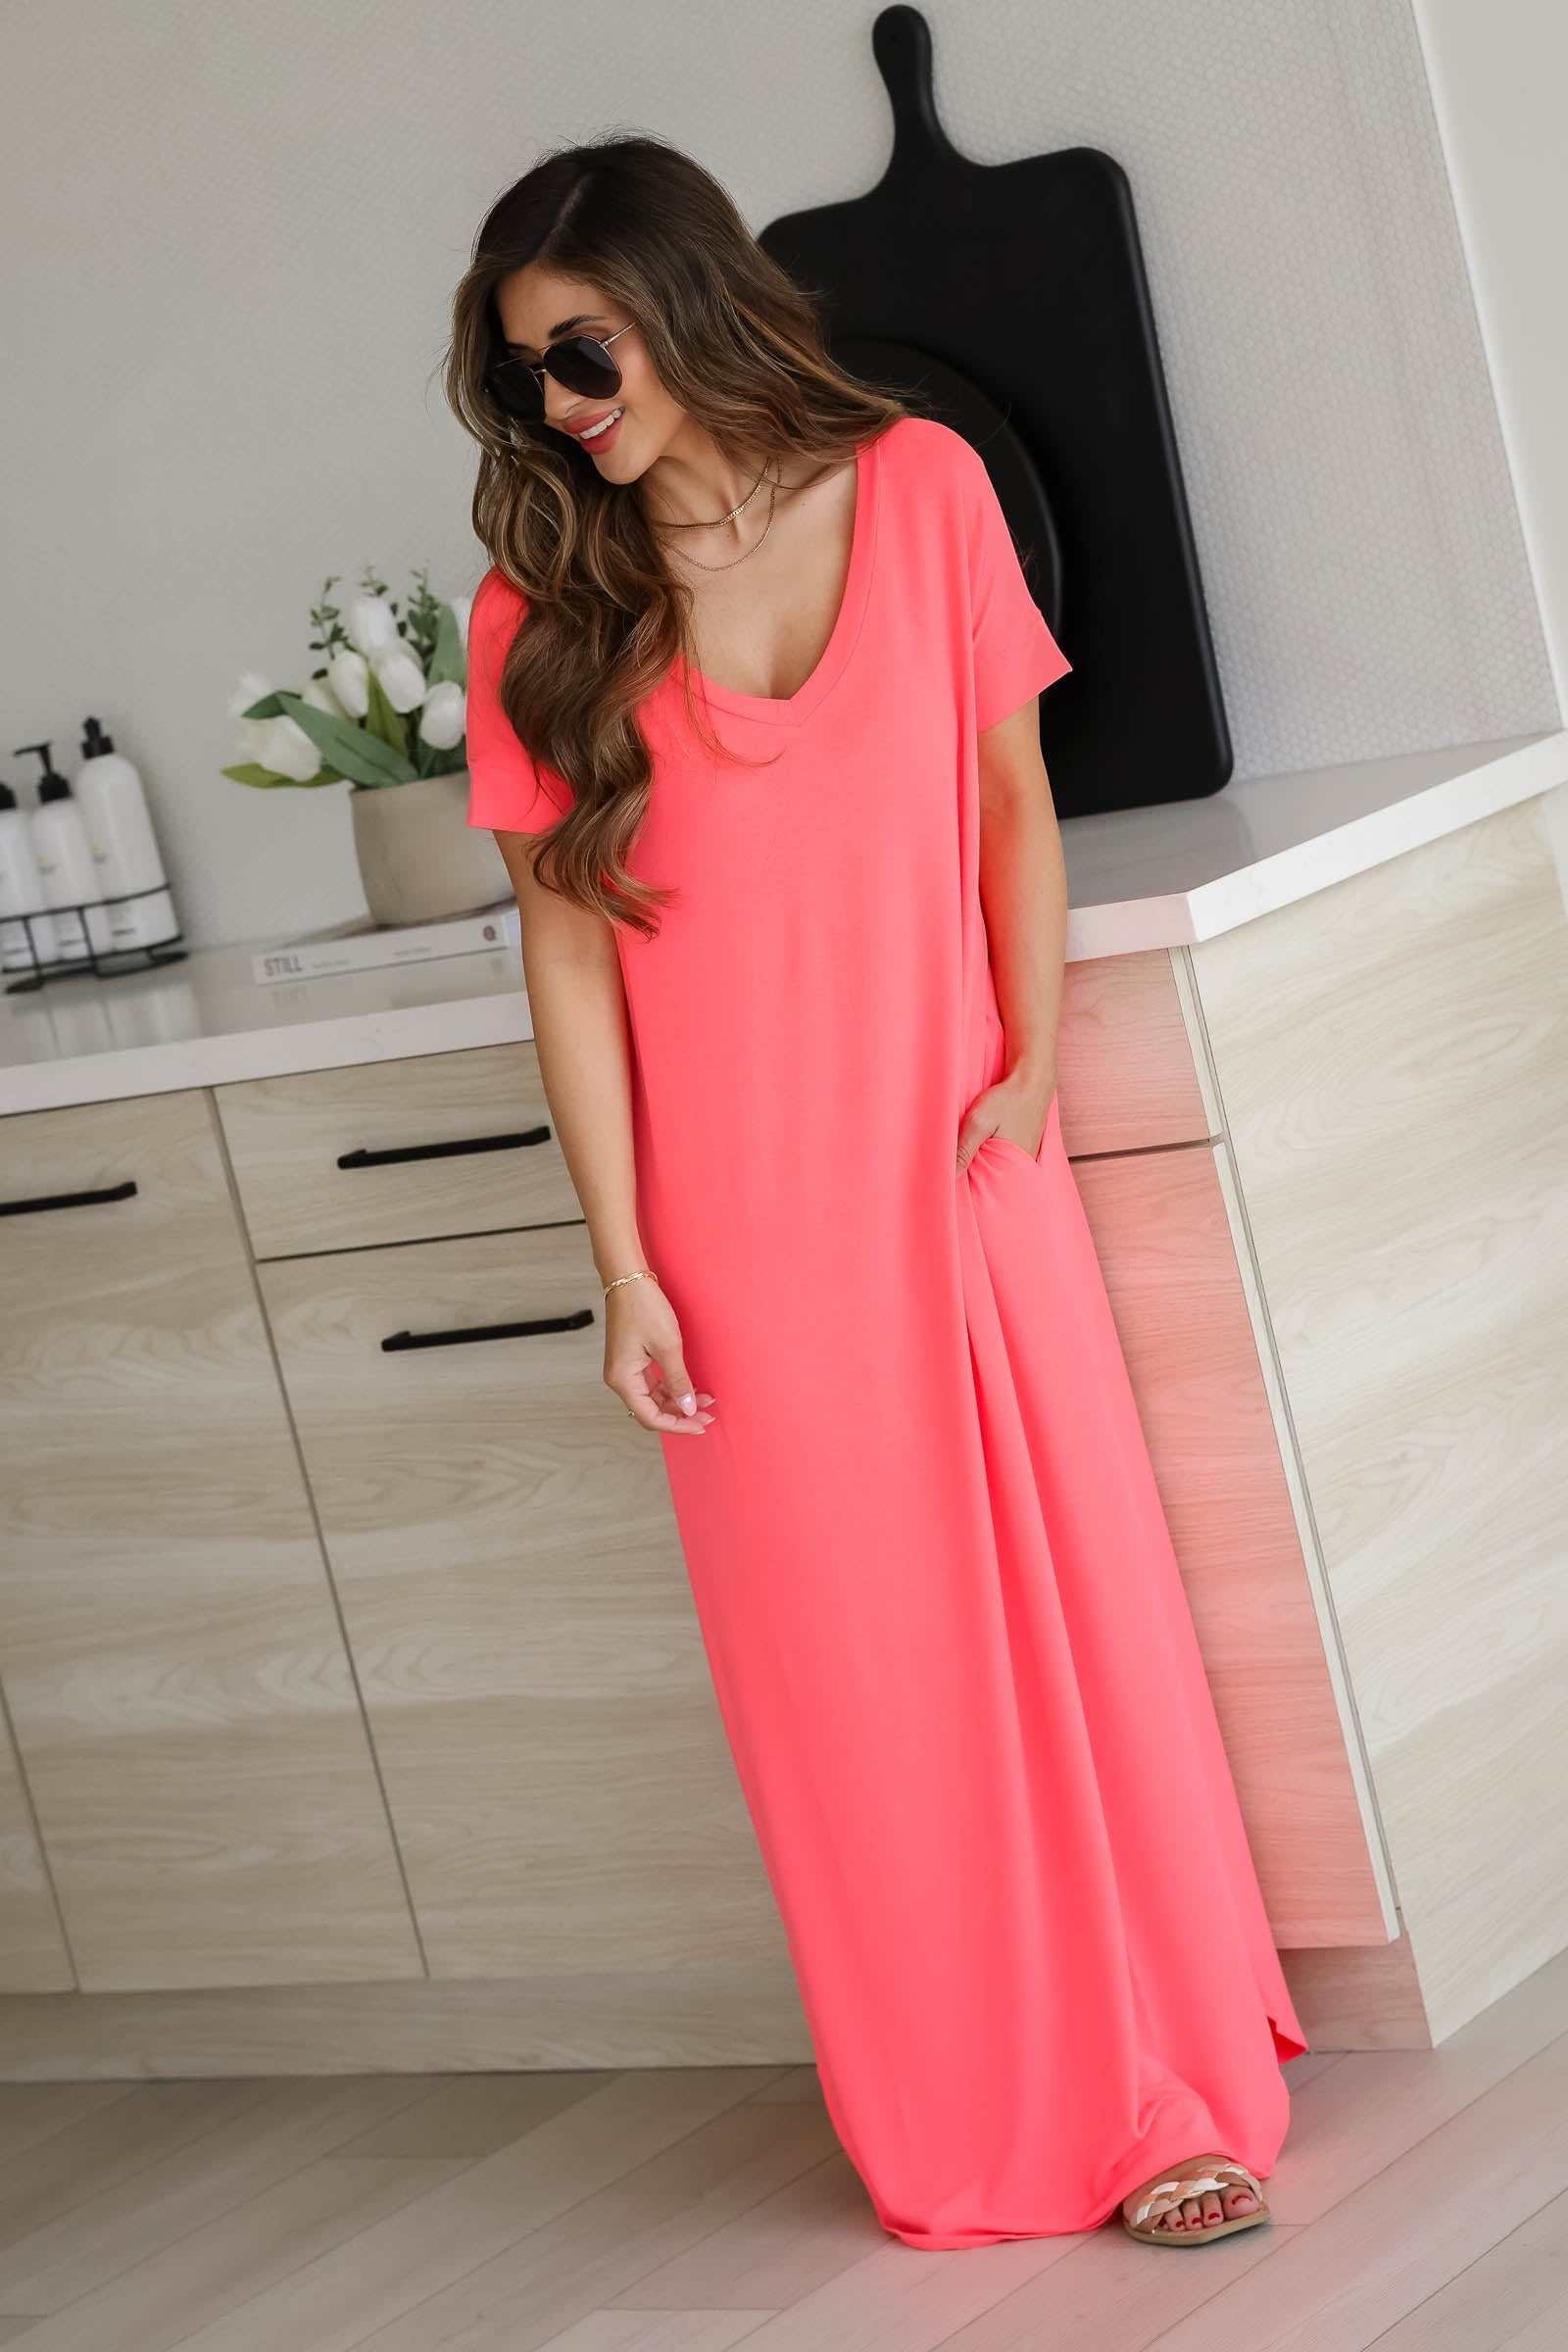 I'll Be By The Pool Maxi Dress - Neon Coral Pink, Closet Candy, 1